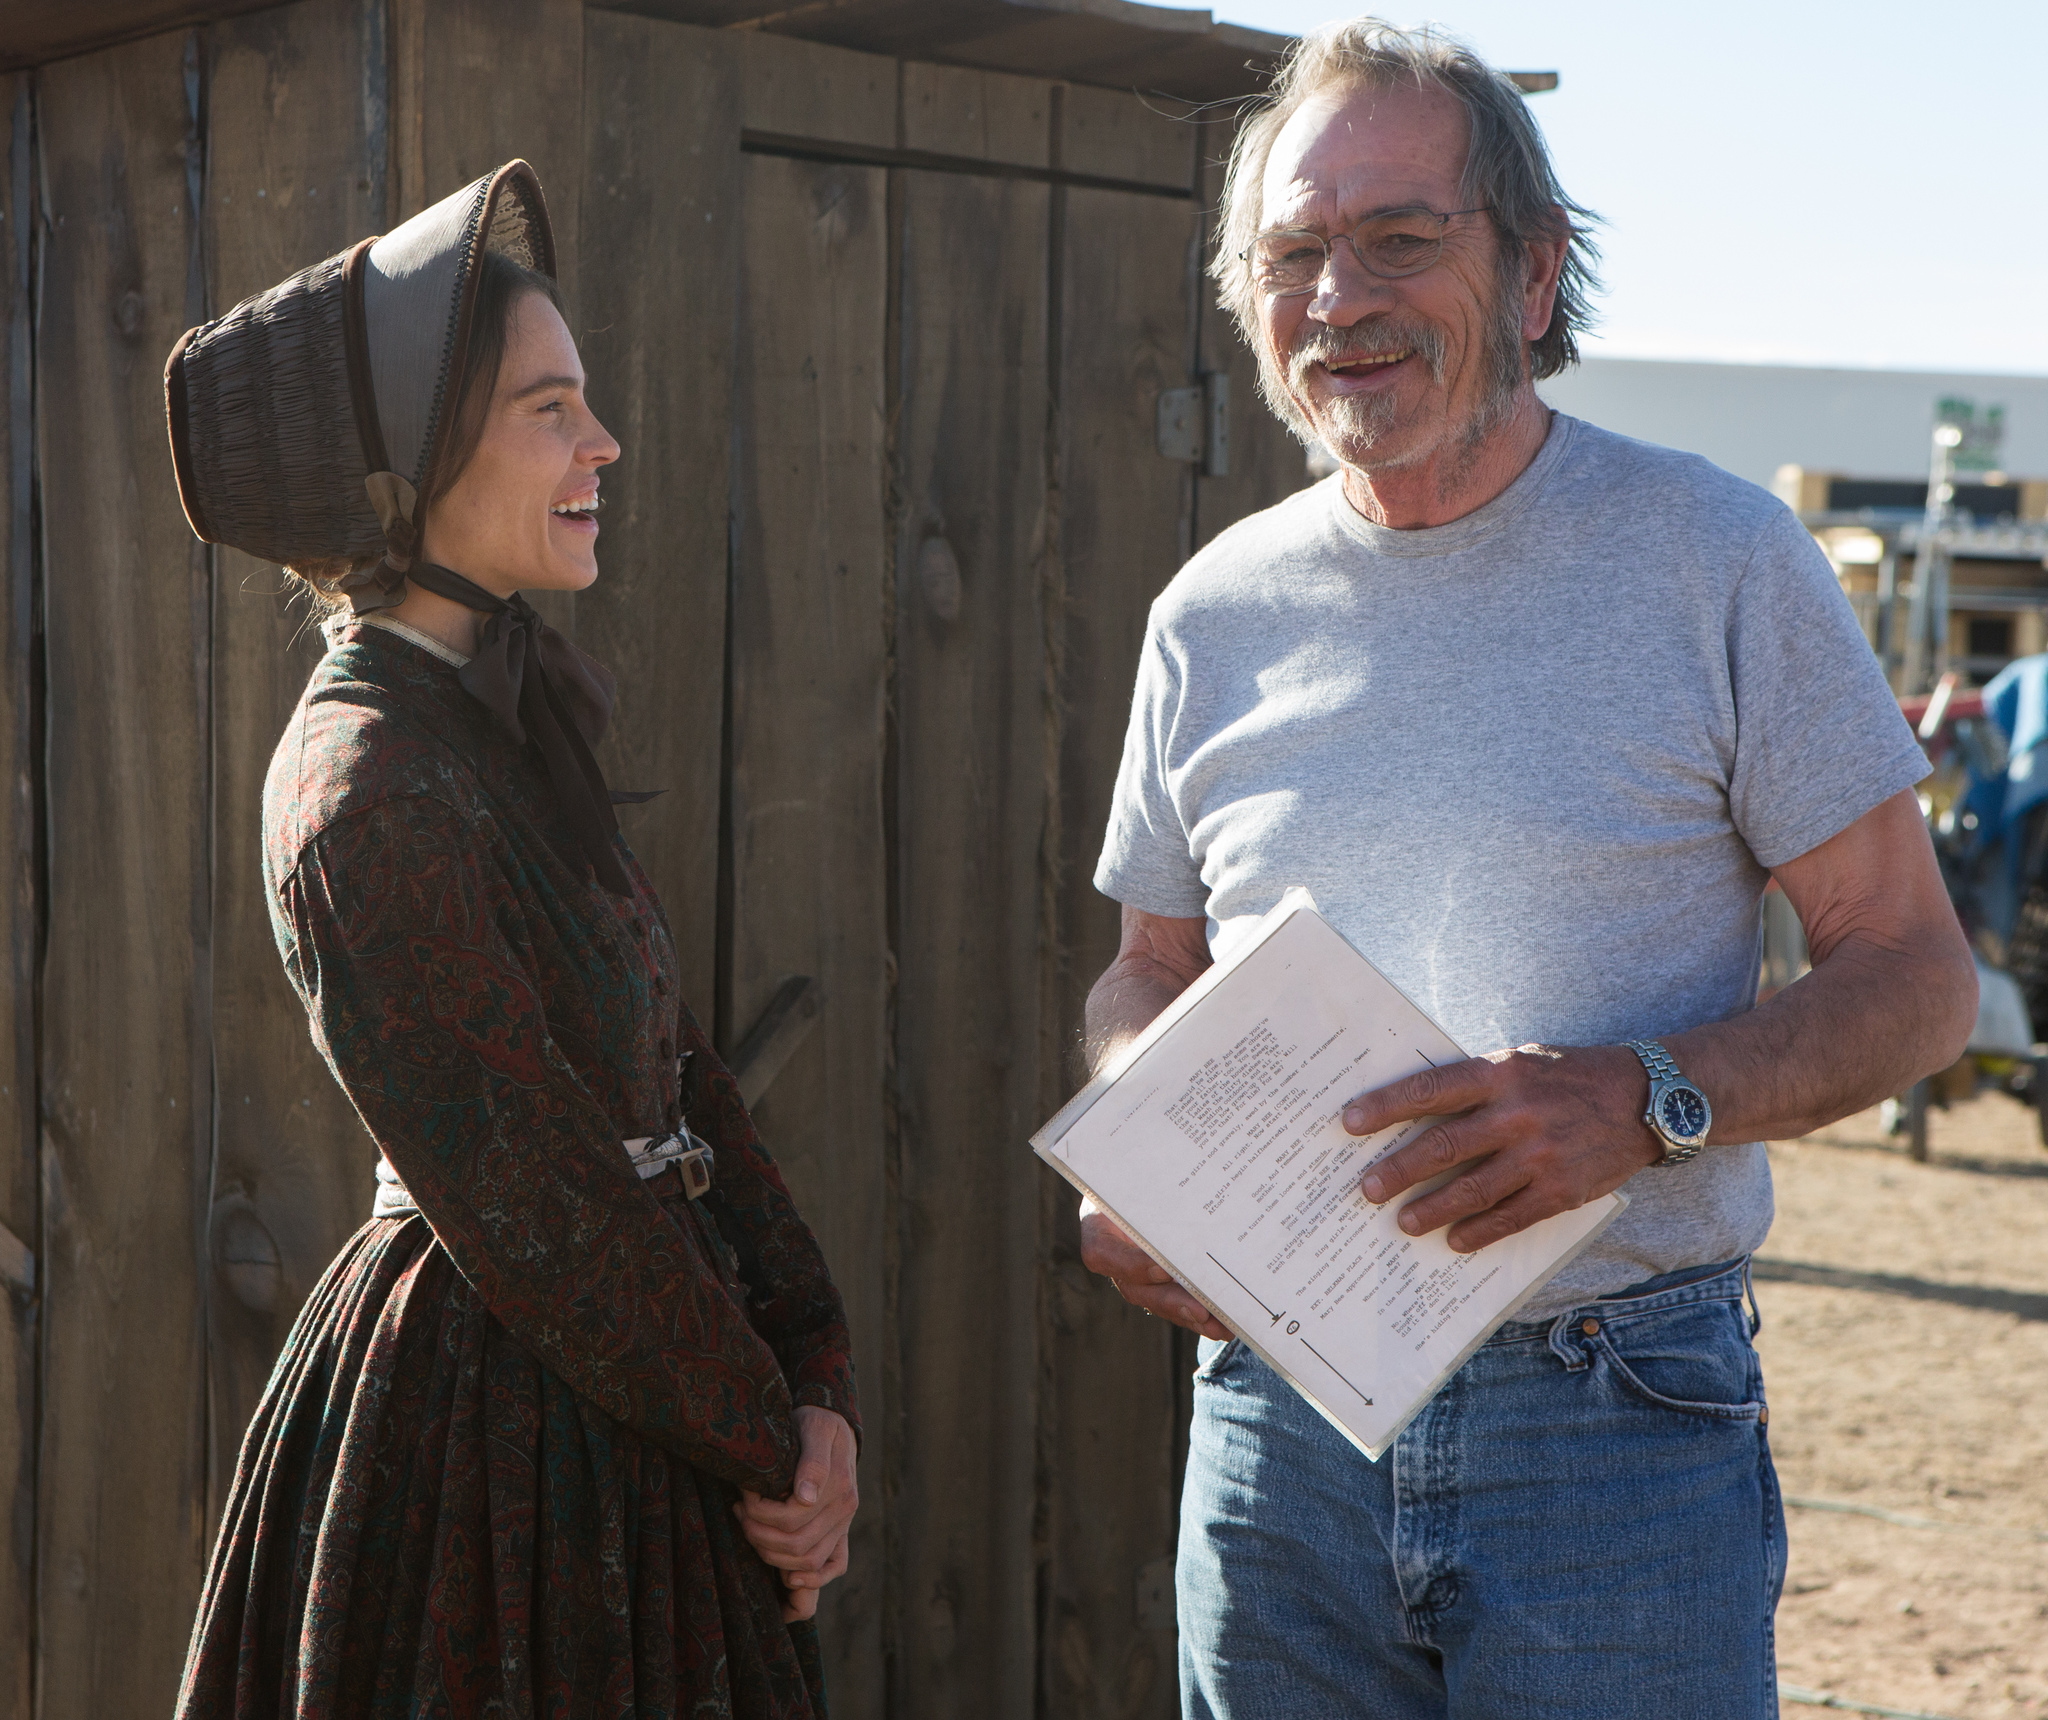 Tommy Lee Jones and Hilary Swank in The Homesman (2014)